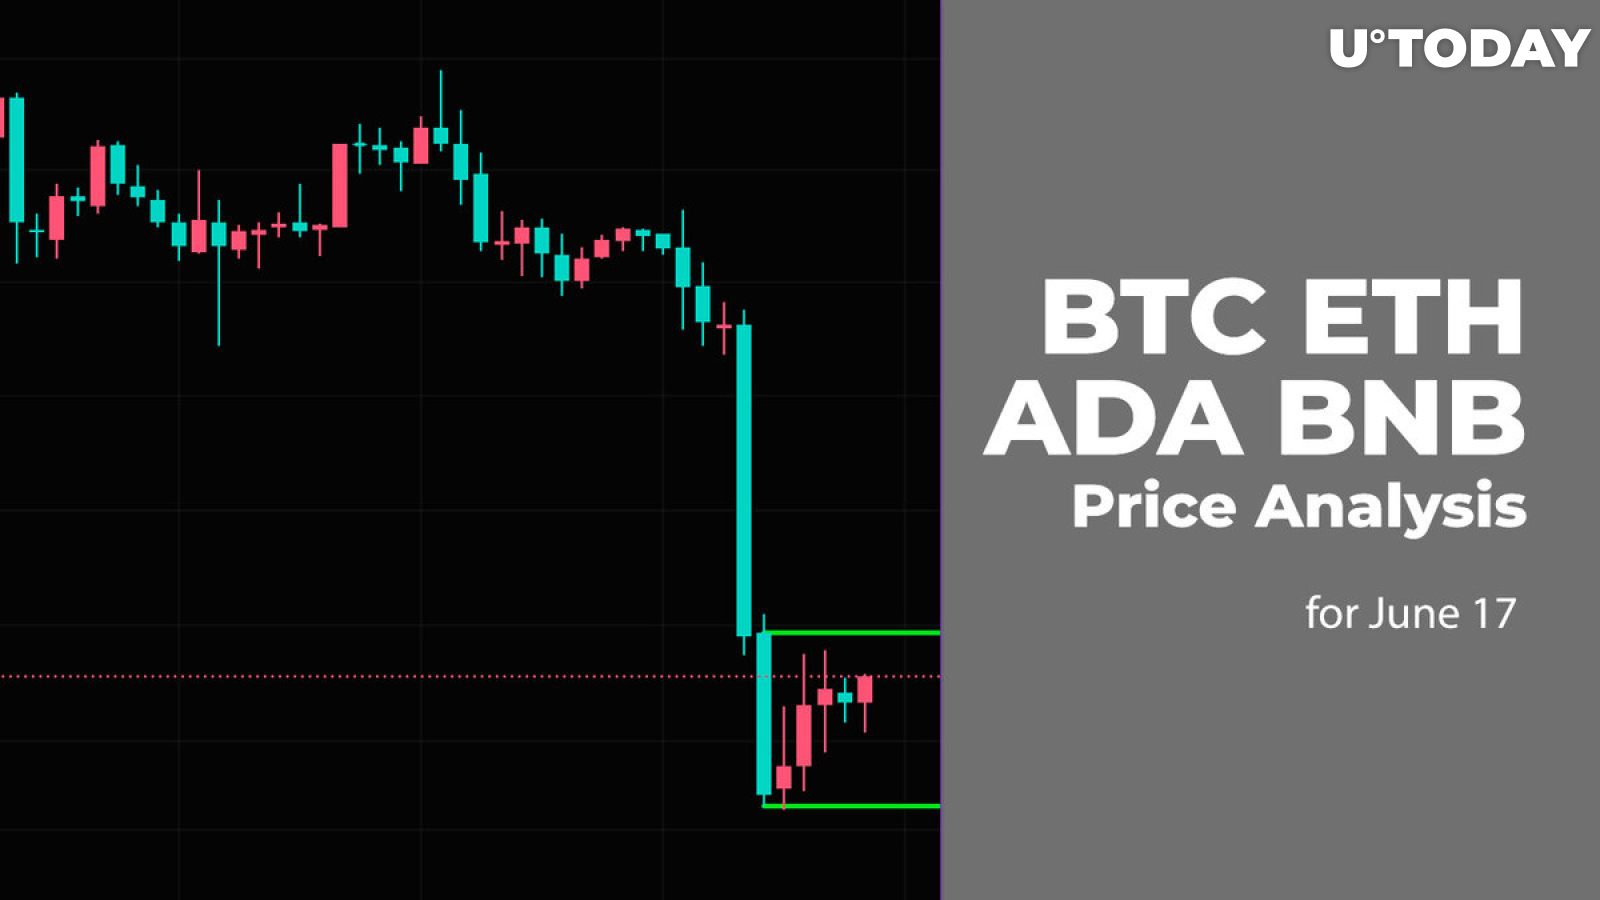 BTC, ETH, ADA and BNB Price Analysis for June 17